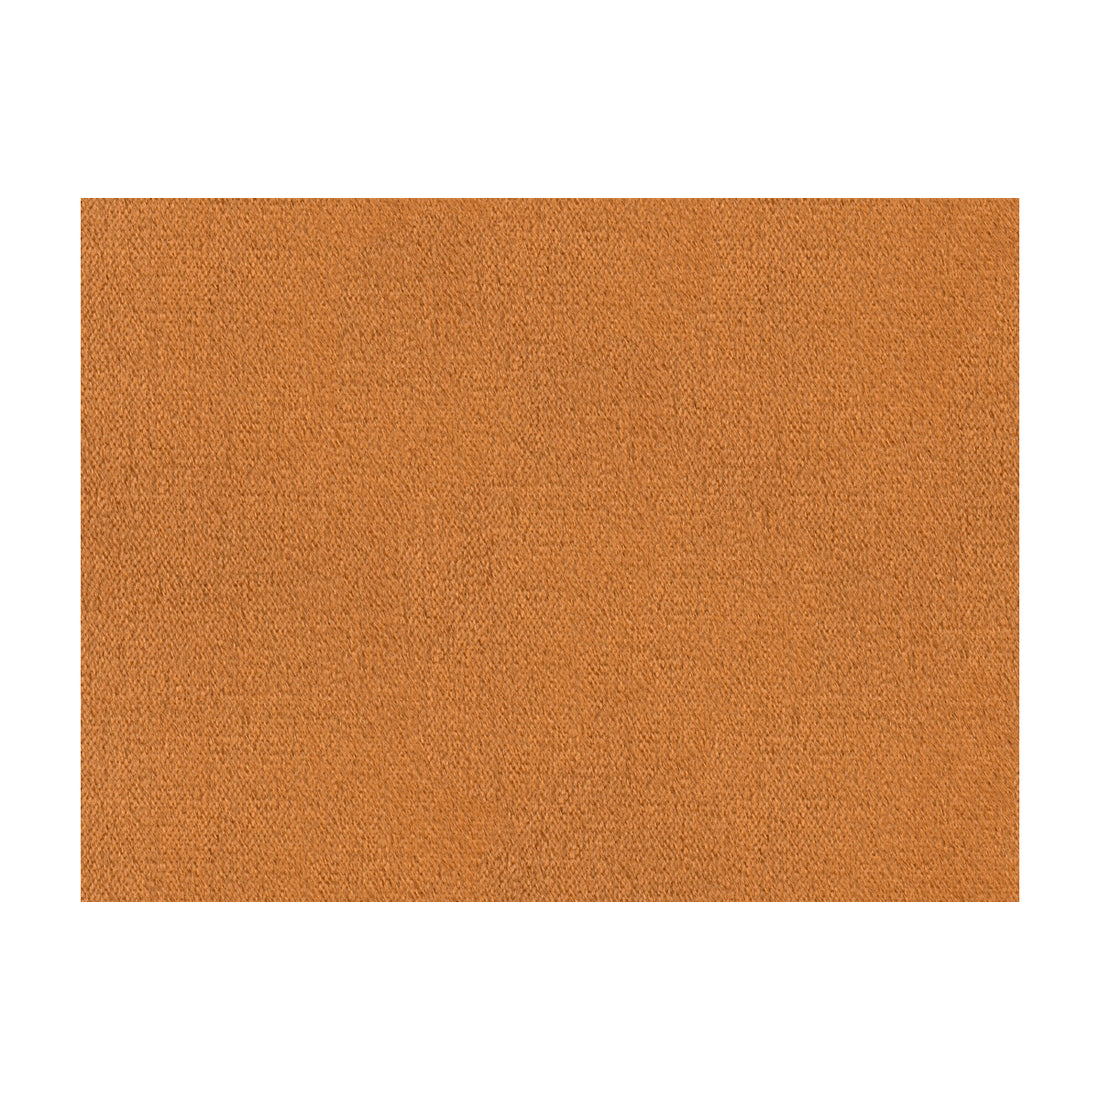 Autun Mohair Velvet fabric in caramel color - pattern BR-89778.830.0 - by Brunschwig &amp; Fils